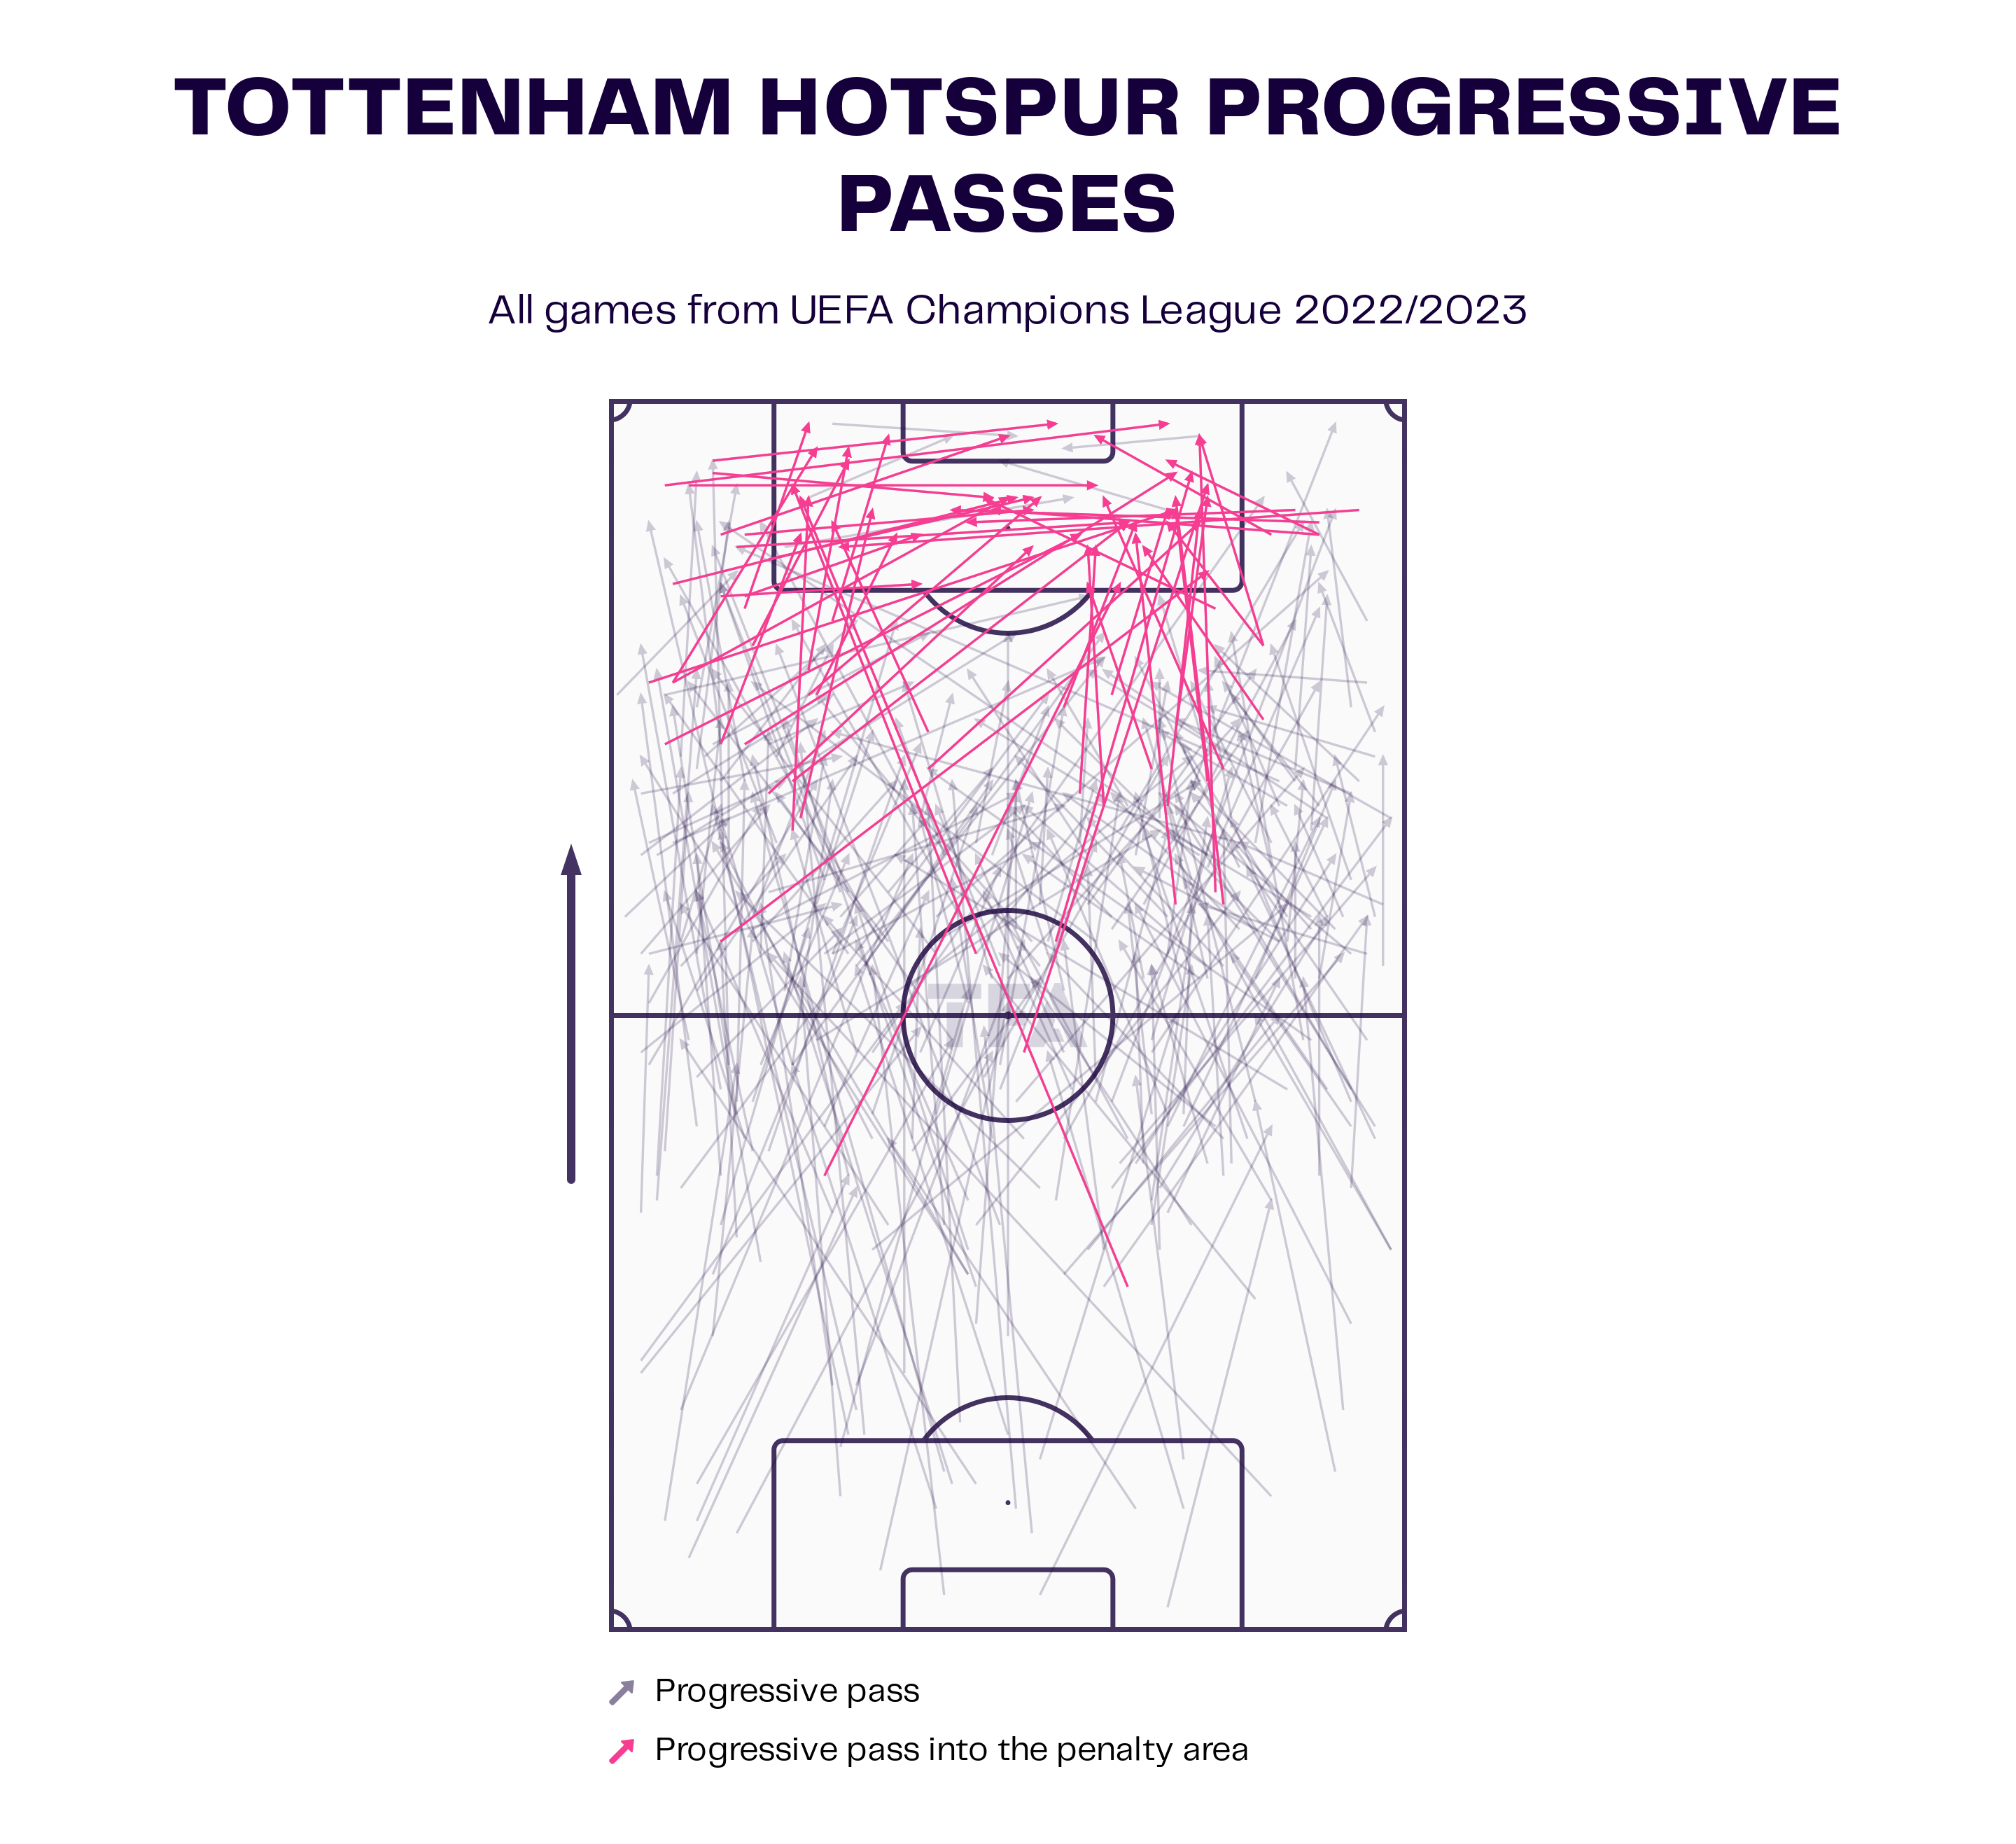 AC Milan vs Tottenham Hotspur Preview: UEFA Champions League 2022/23 Data, Stats, Analysis, and Scout Report